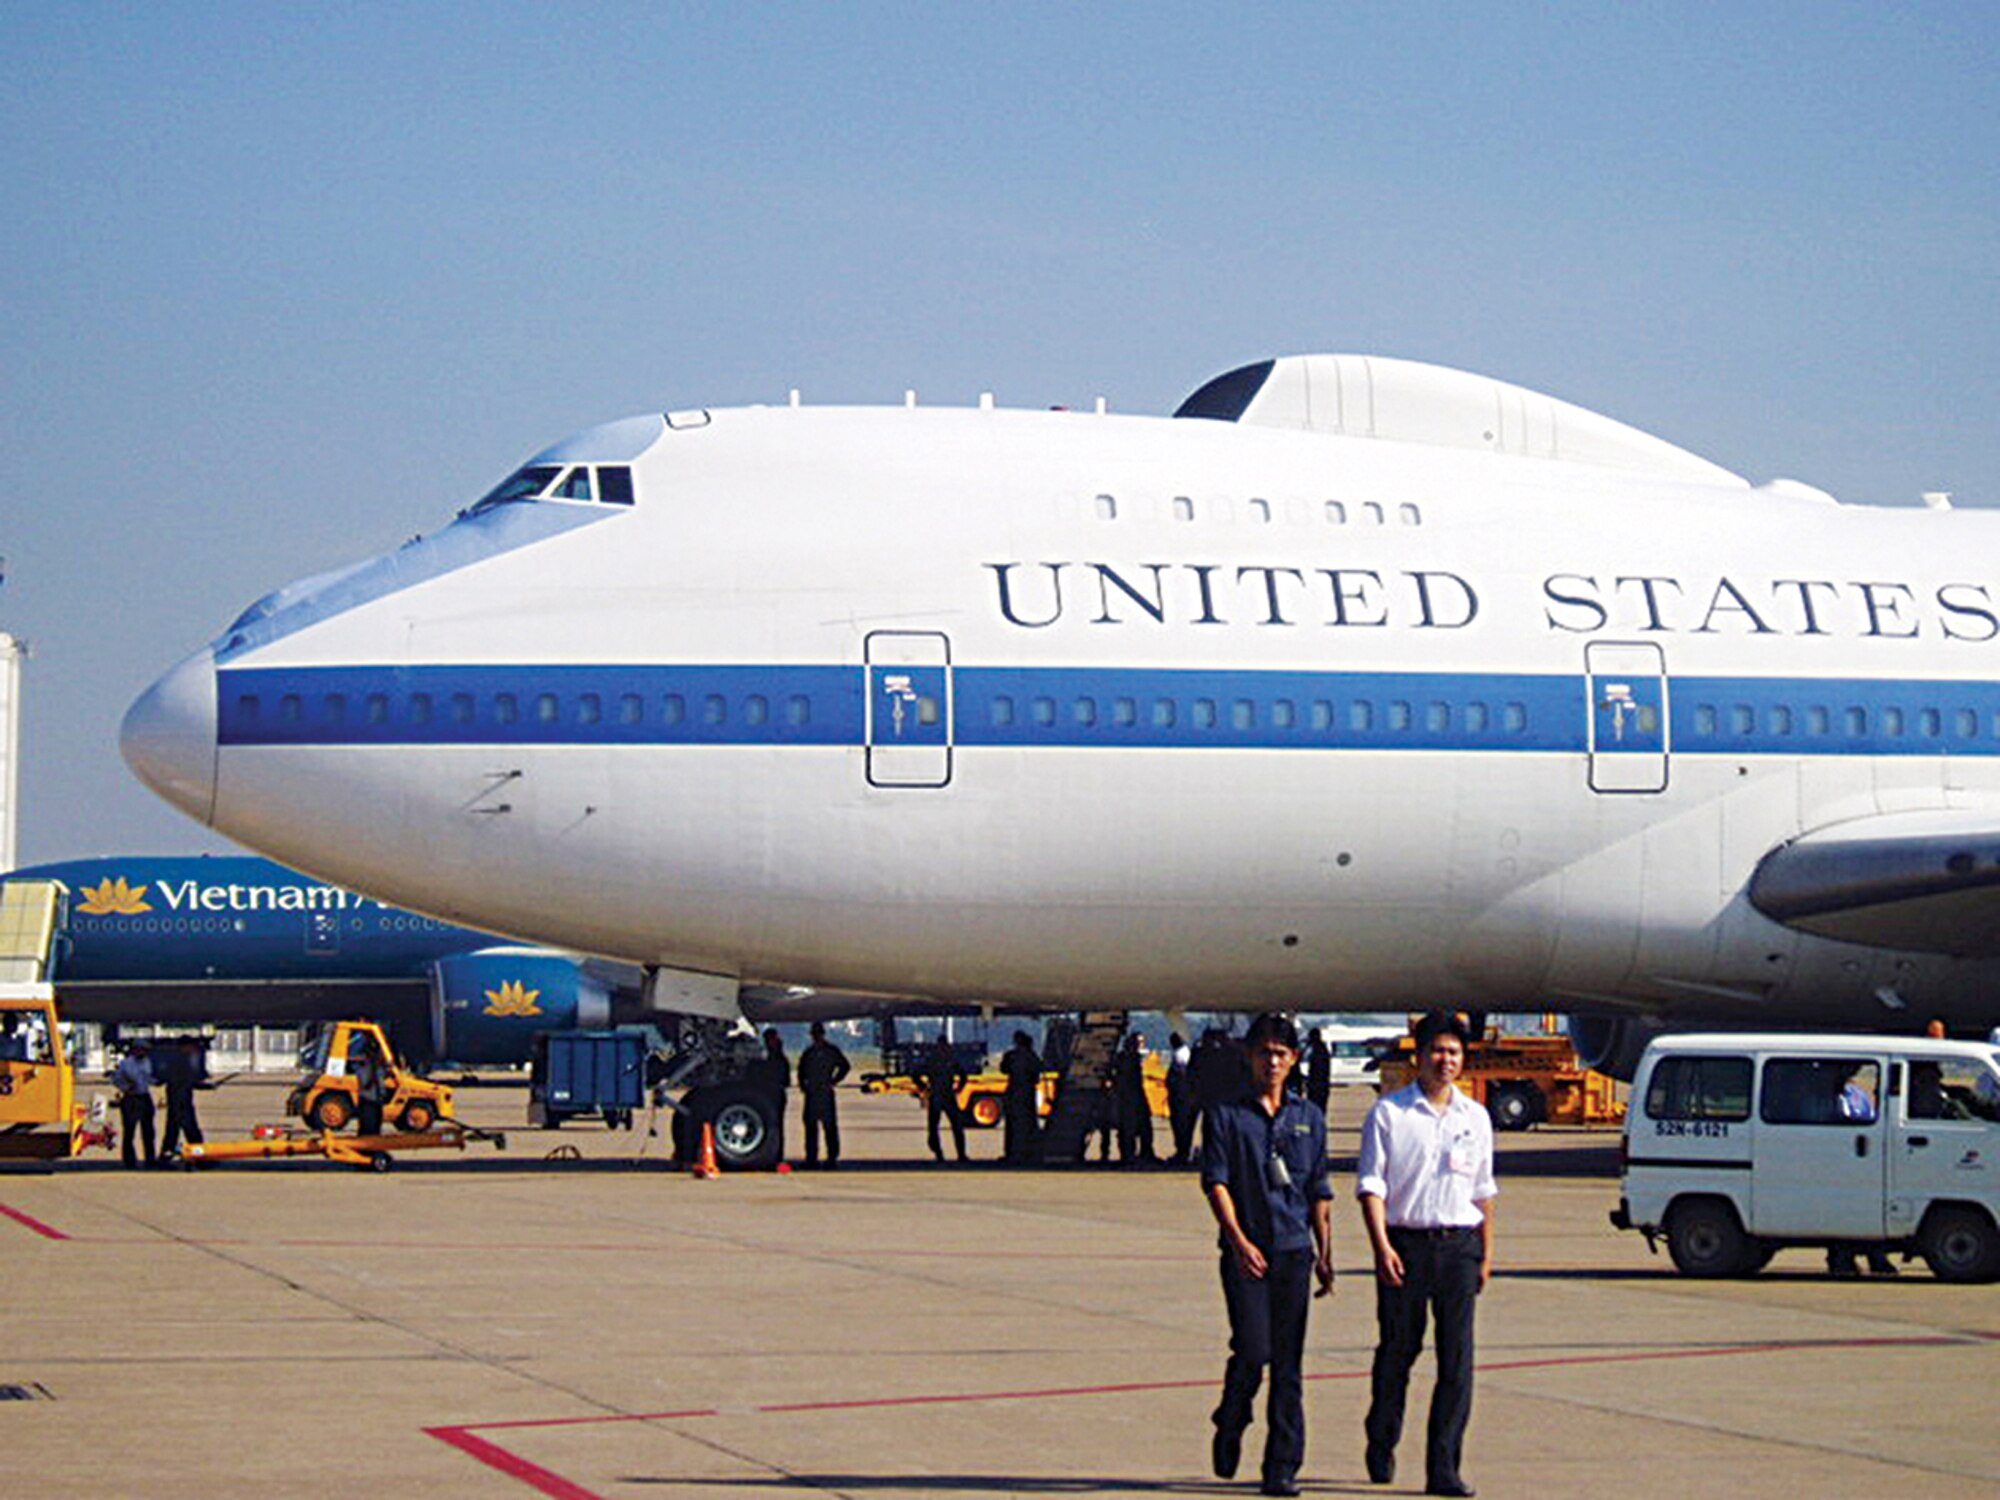 One of Offutt’s E-4B National Airborne Operations Center aircraft sits on the tarmac in Vietnam. The 55th Wing aircraft was called on to lend a helping hand to the presidential transport aircraft, Air Force One, after it encountered some maintenance issues. The E-4B is a modified Boeing 747 whose mission is to provide support to the national leadership of the United States. Photo by Mark Silva/Chicago Tribune